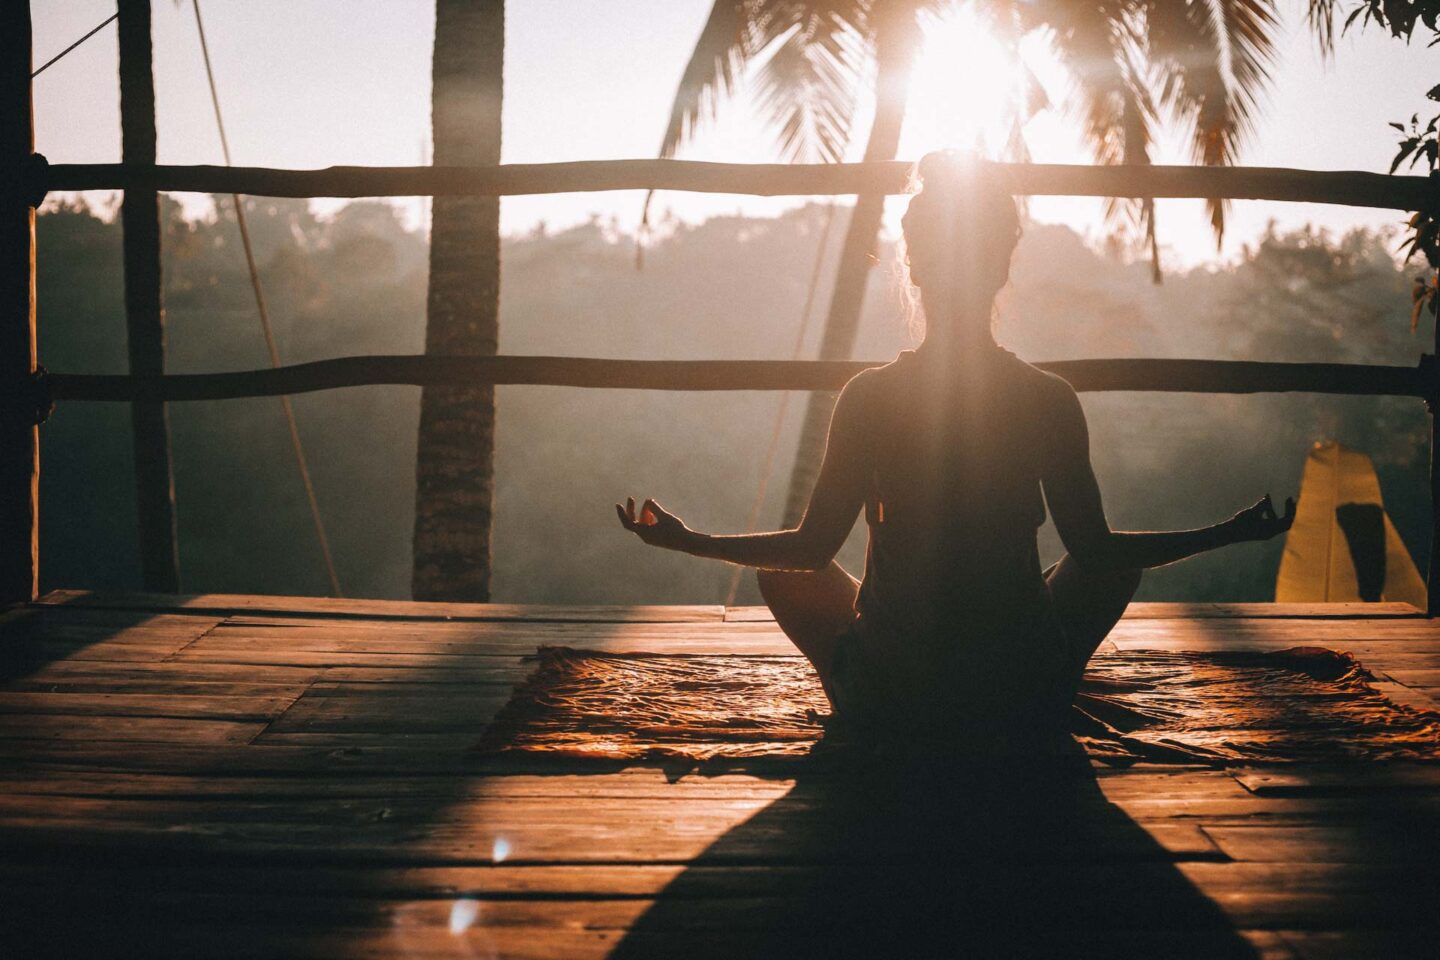 8-DAY WATER FASTING DETOX AND YOGA RETREAT IN PHUKET